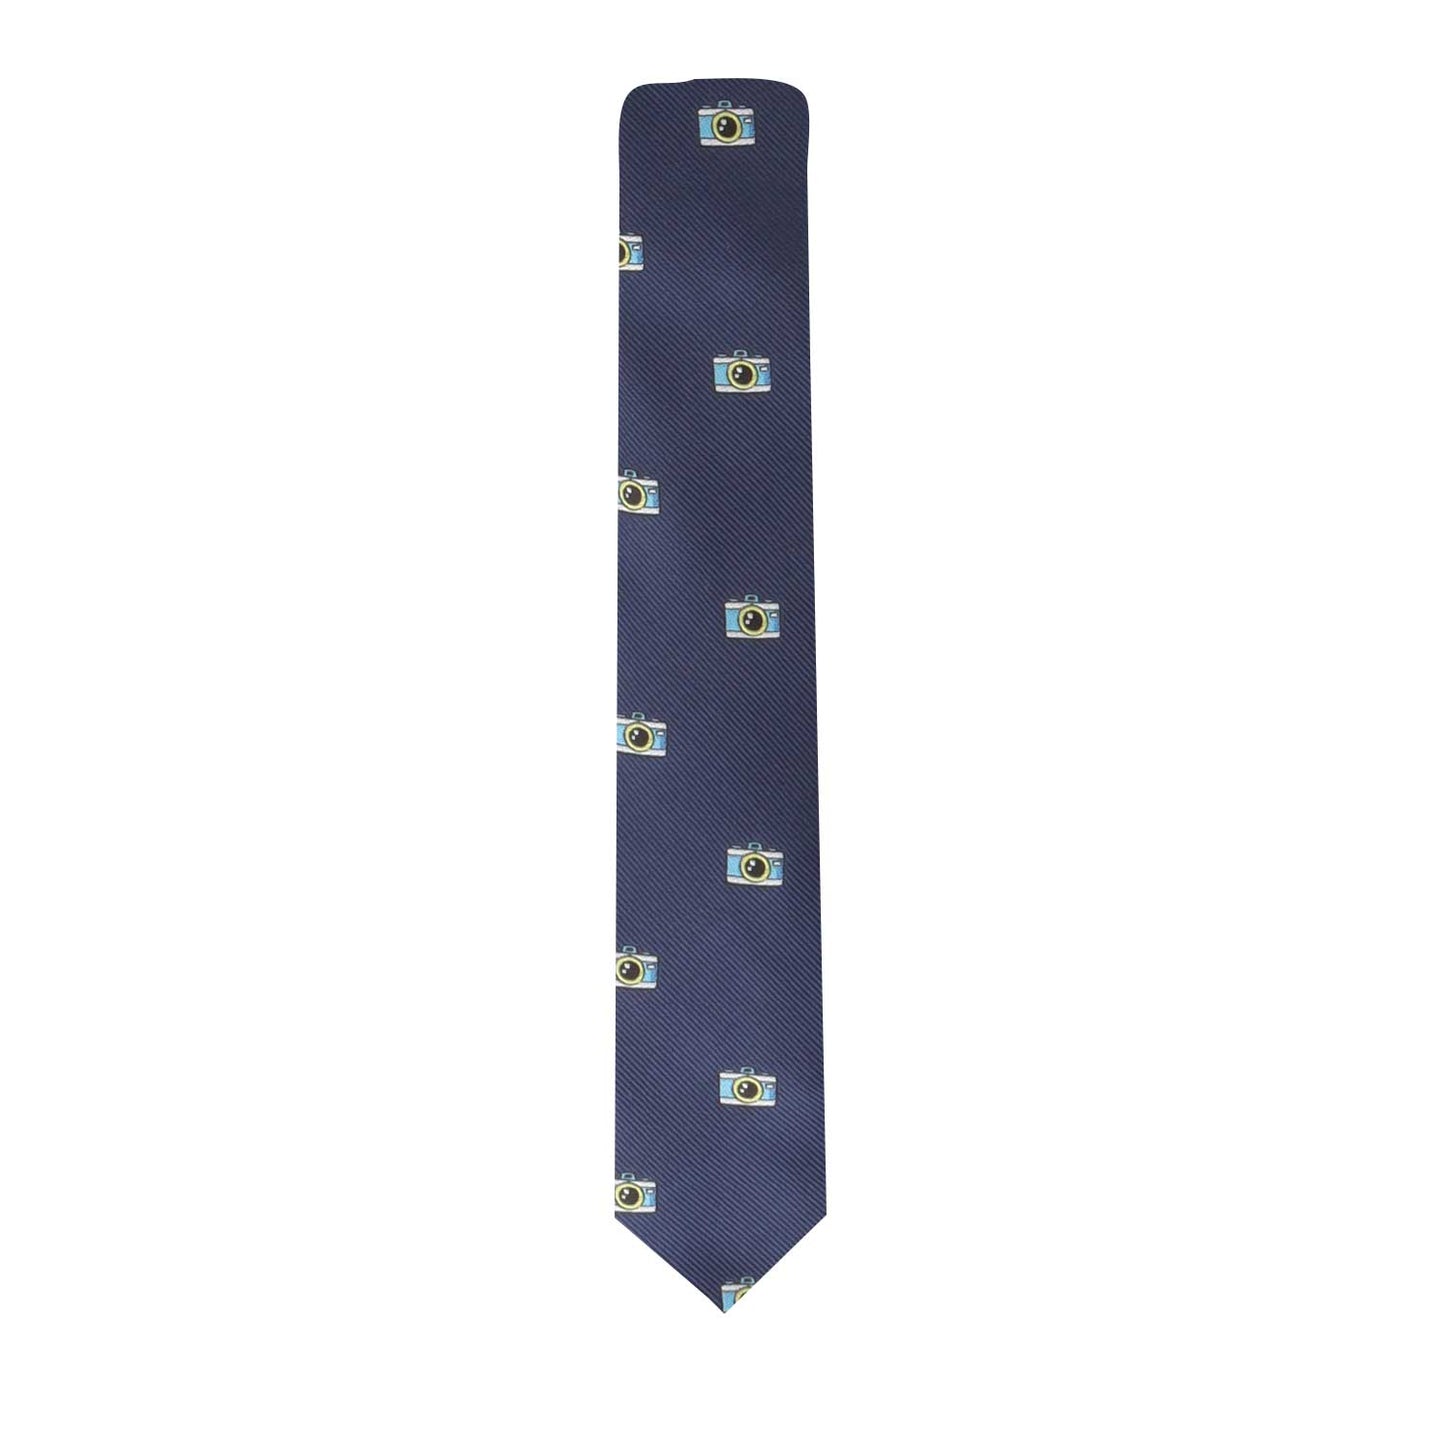 A blue tie with a Camera Skinny Tie design on it.